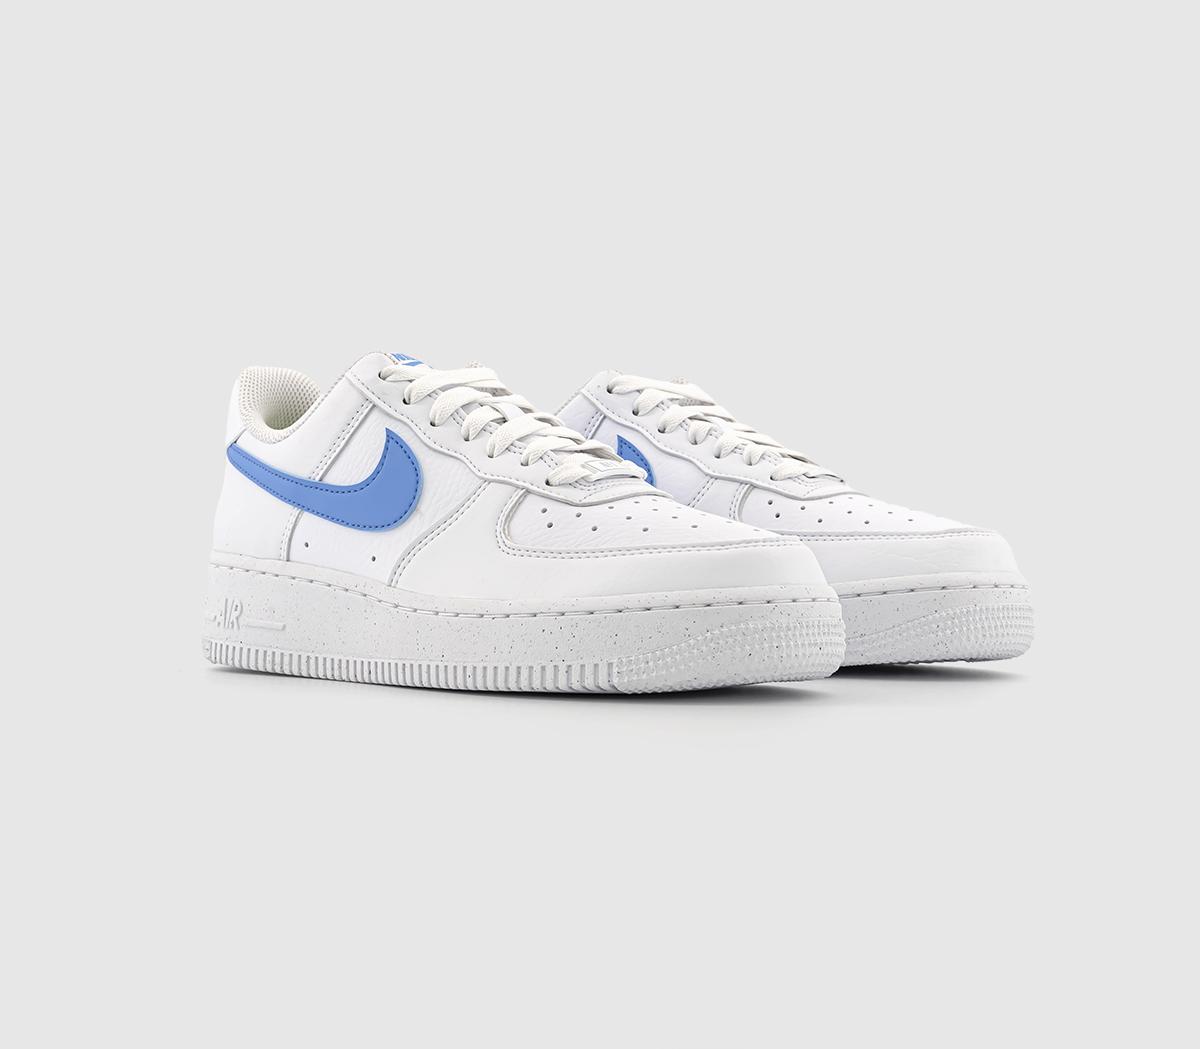 Nike Womens Air Force 1 07 Trainers White Universal Blue Volt Black, 5